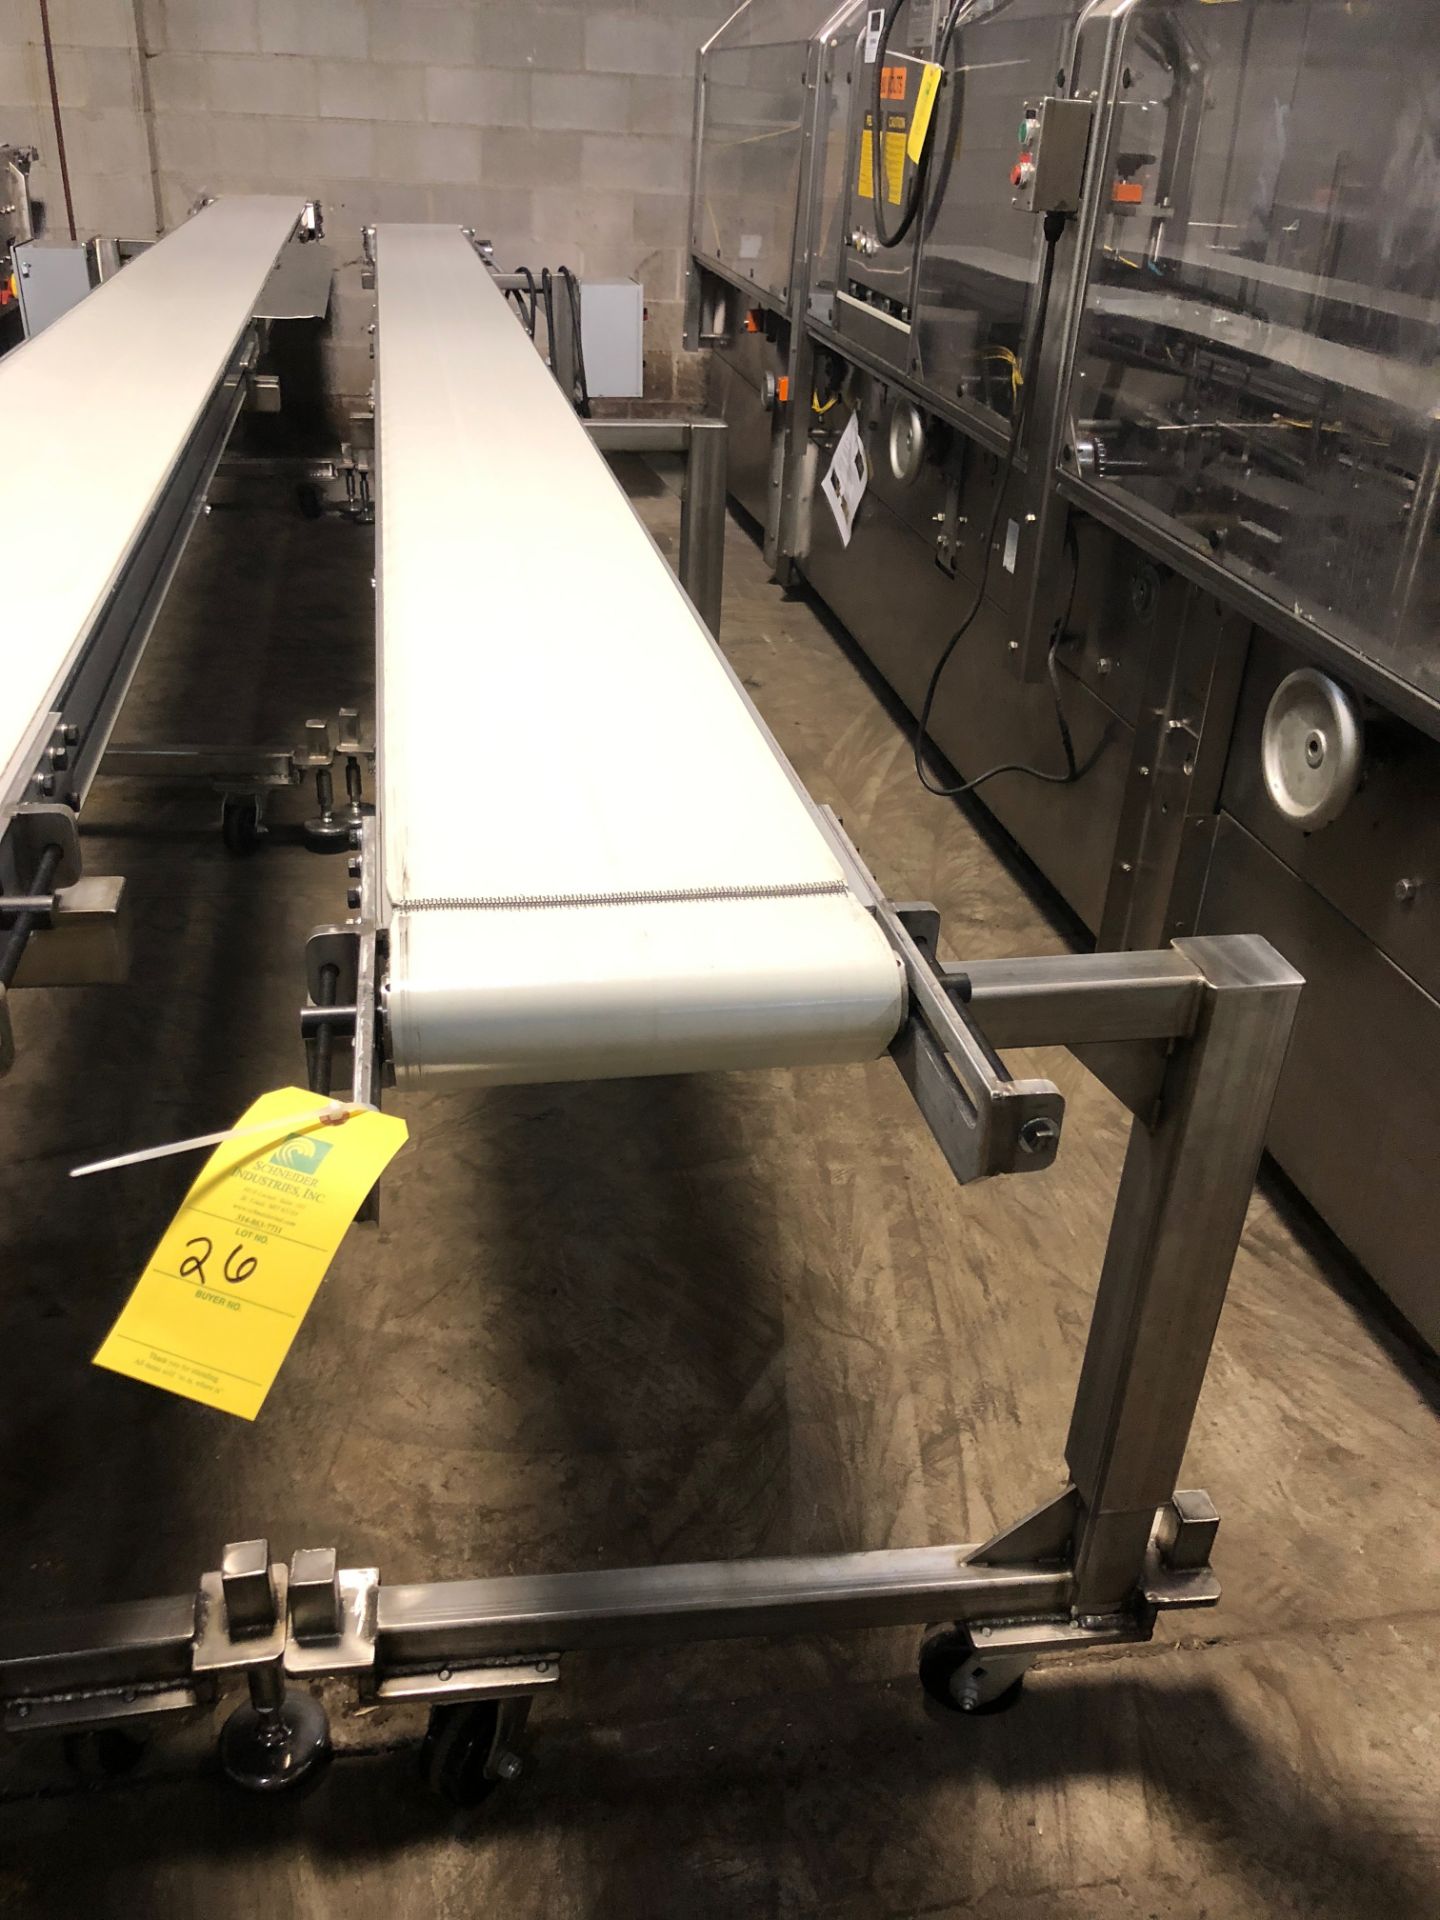 Domer 3200 Series Belt Conveyor, 11.5 in. x 20 ft. long Rigging Fee for the item: $100